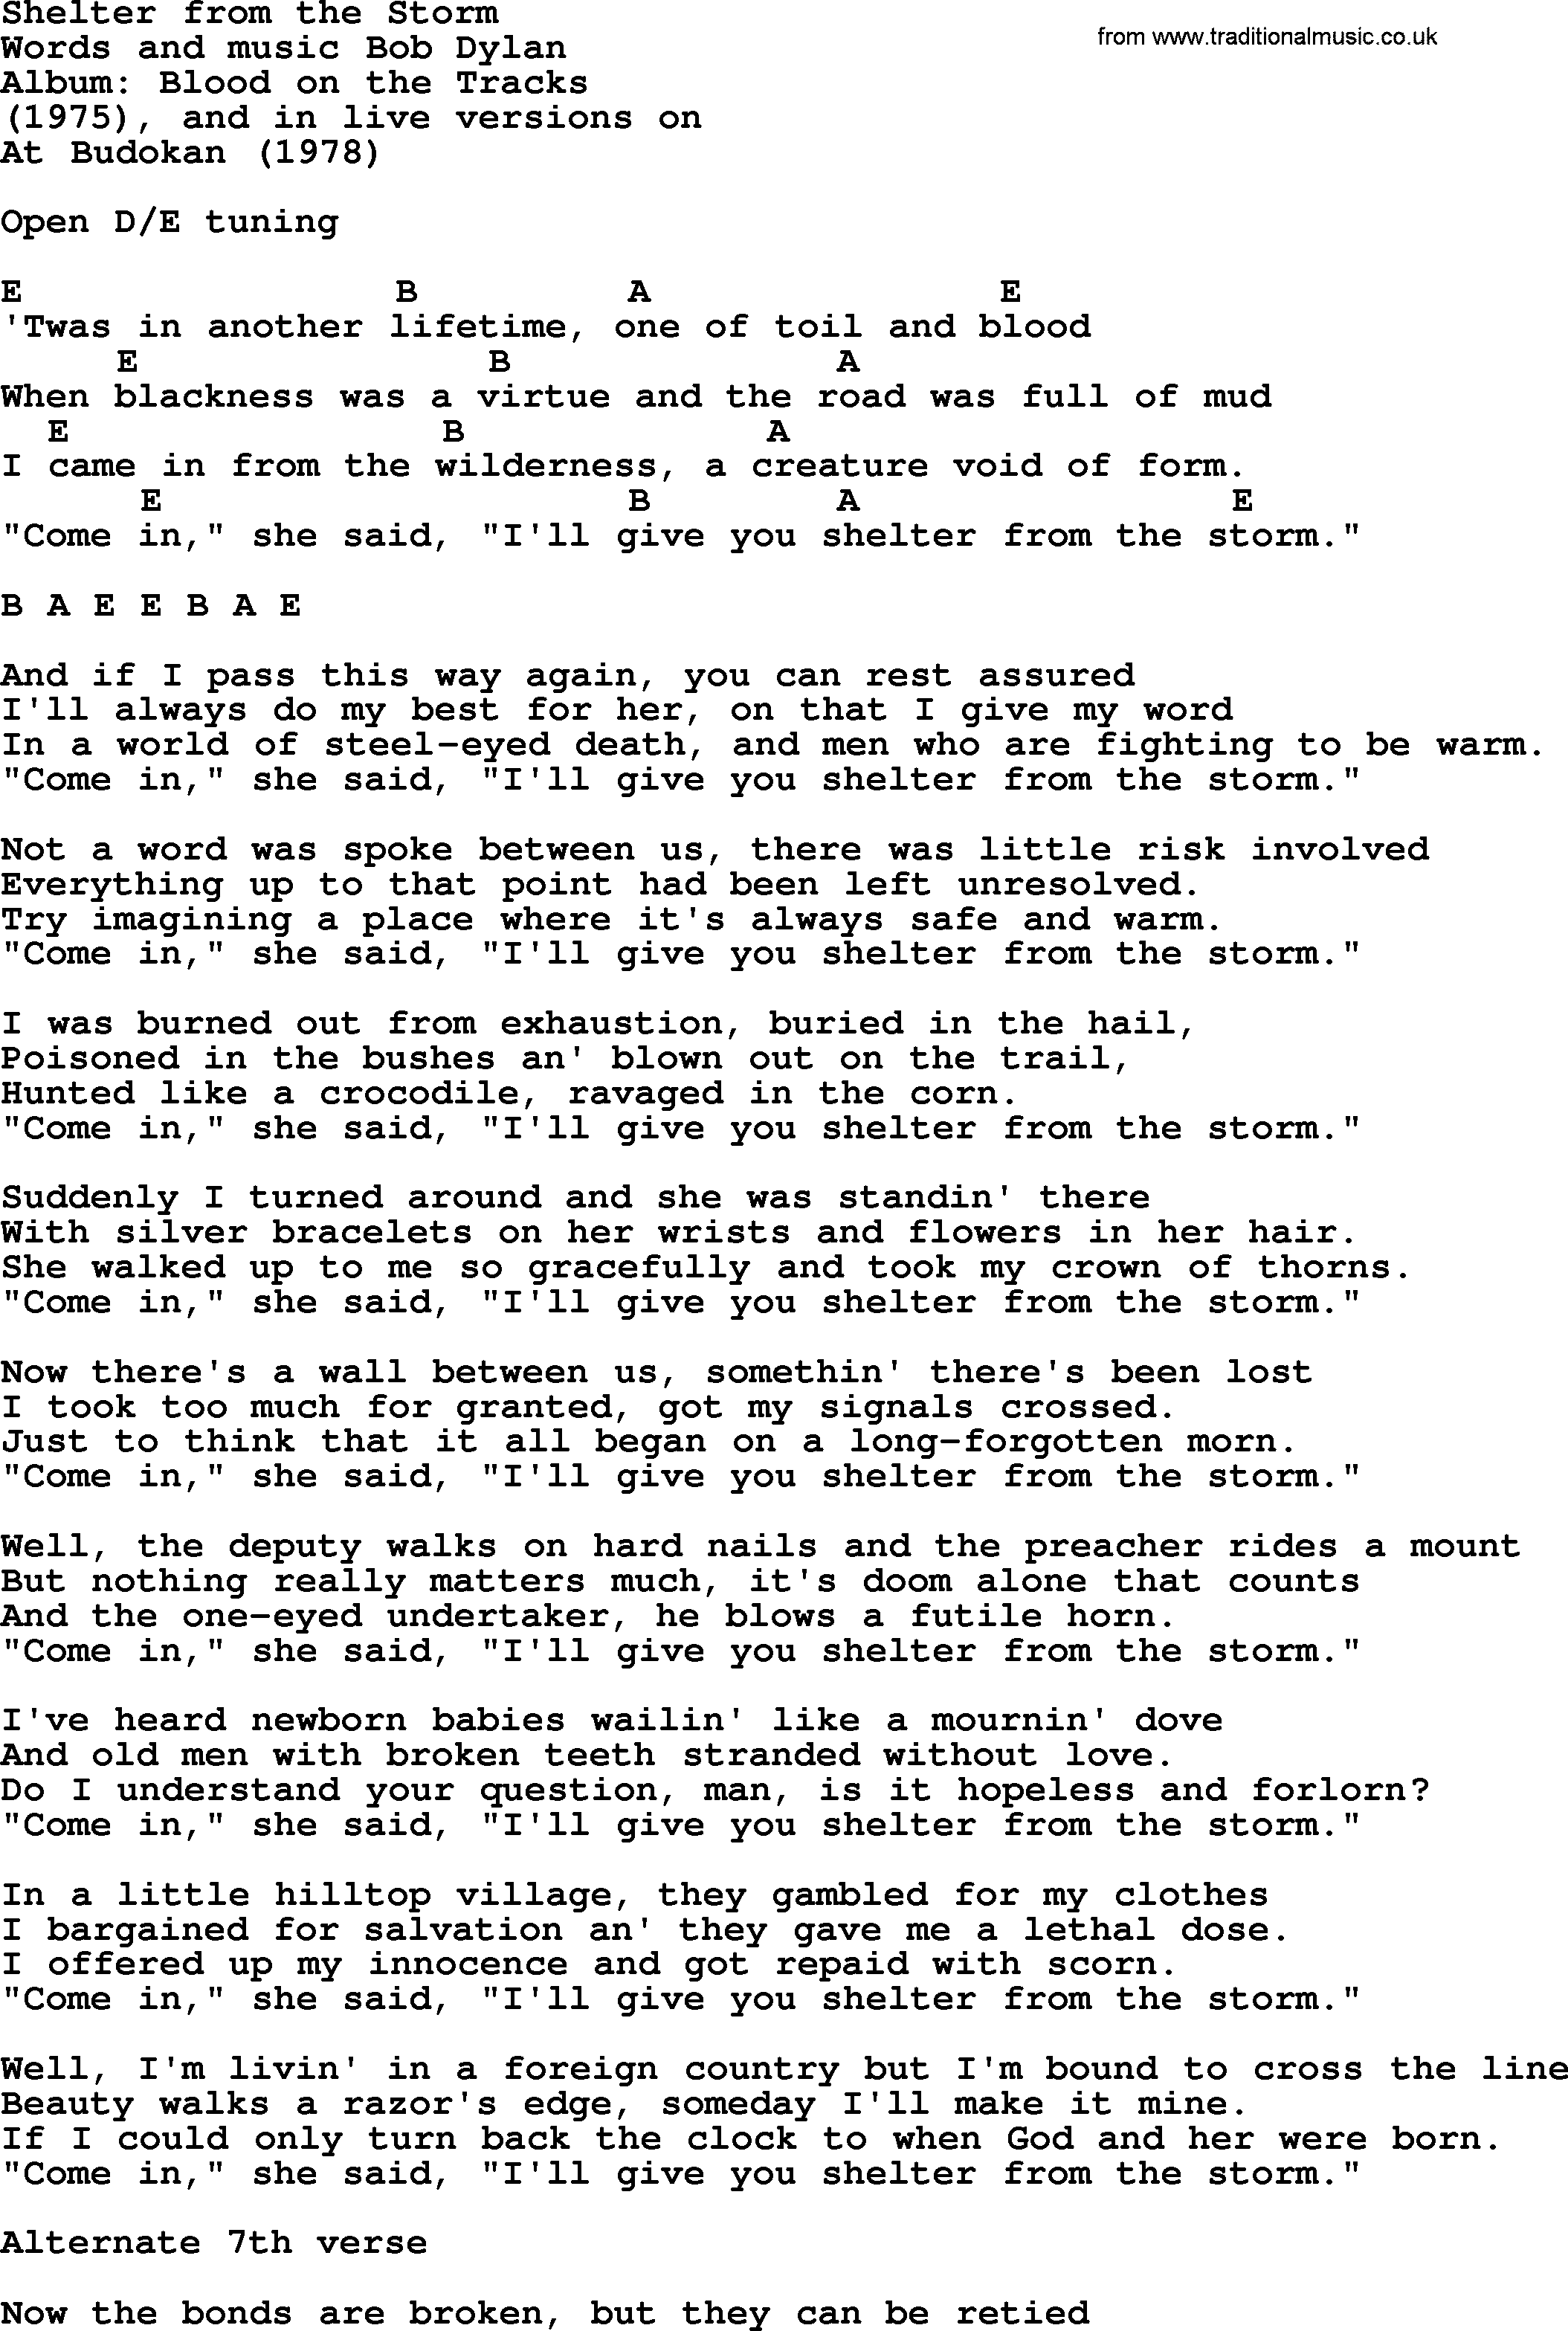 Bob Dylan song, lyrics with chords - Shelter from the Storm